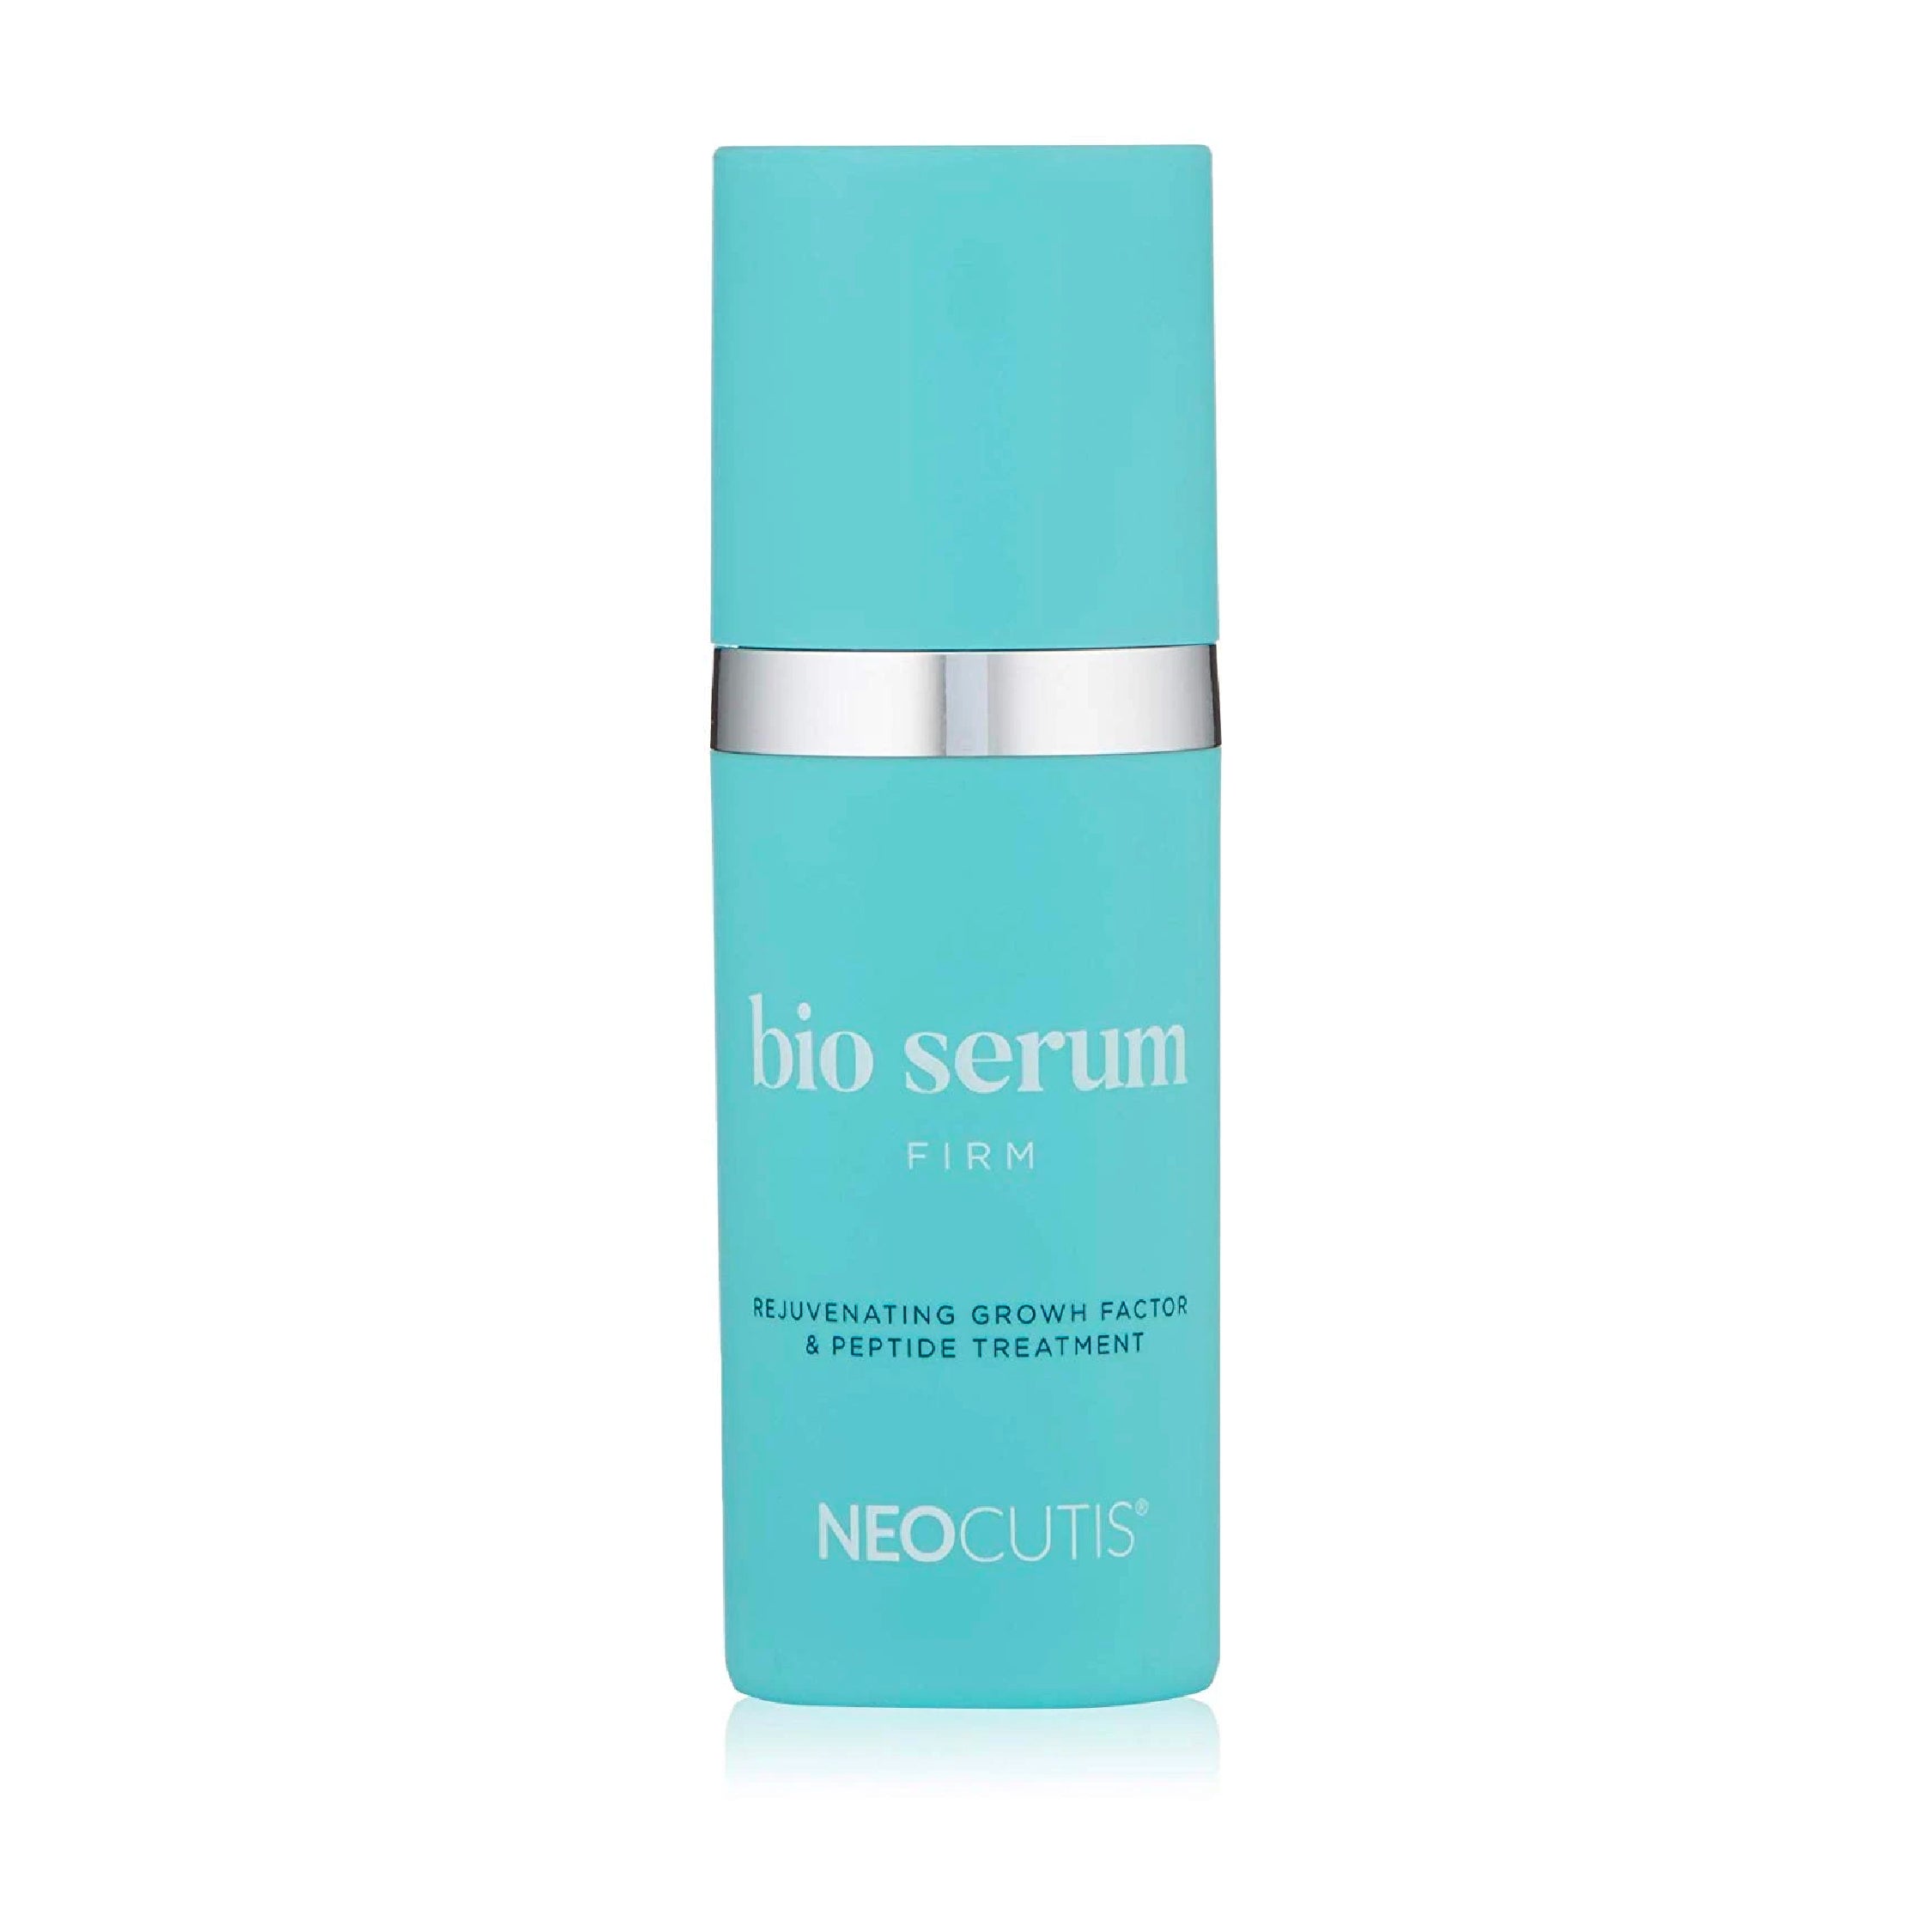 NEOCUTIS Bio Serum Firm - 30 ML - | 5 Month Supply | Nourishes & restores collagen, elastin and hyaluronic acid for a youthful appearance | Rejuvenating Growth Factor & Peptide Treatment |Dermatologist tested